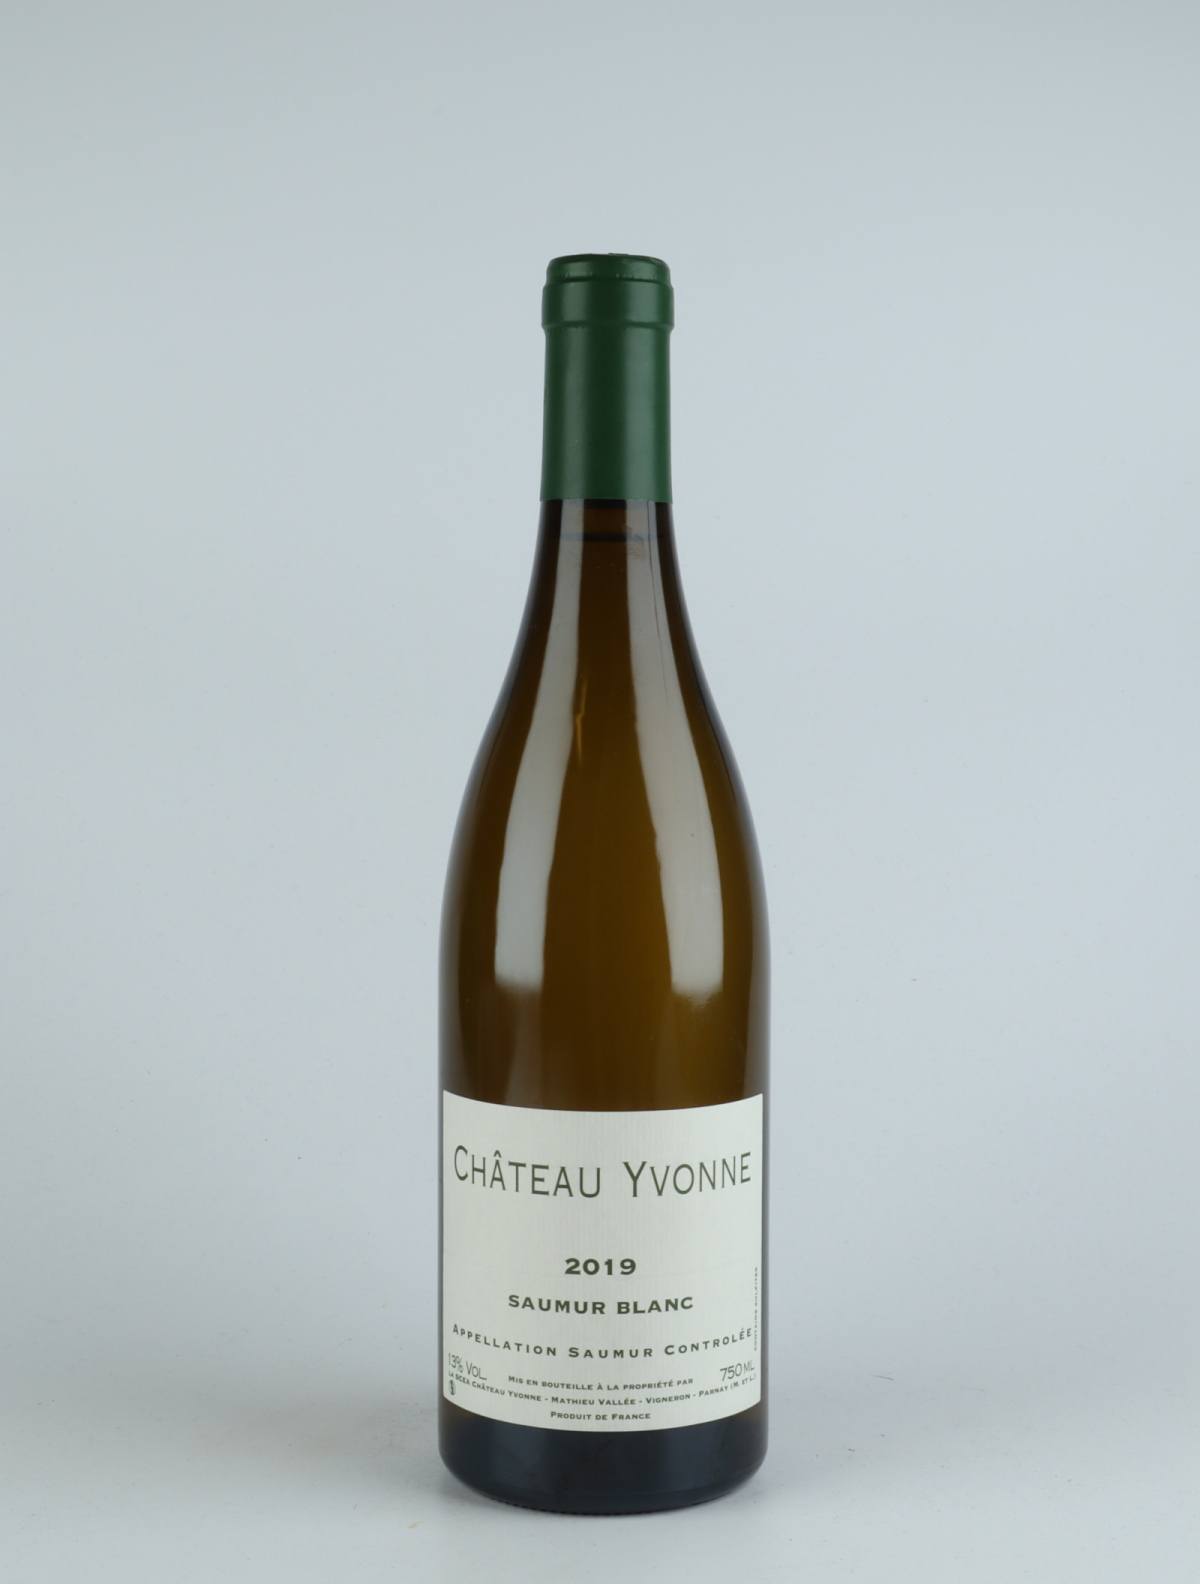 A bottle 2019 Saumur Blanc White wine from Château Yvonne, Loire in France